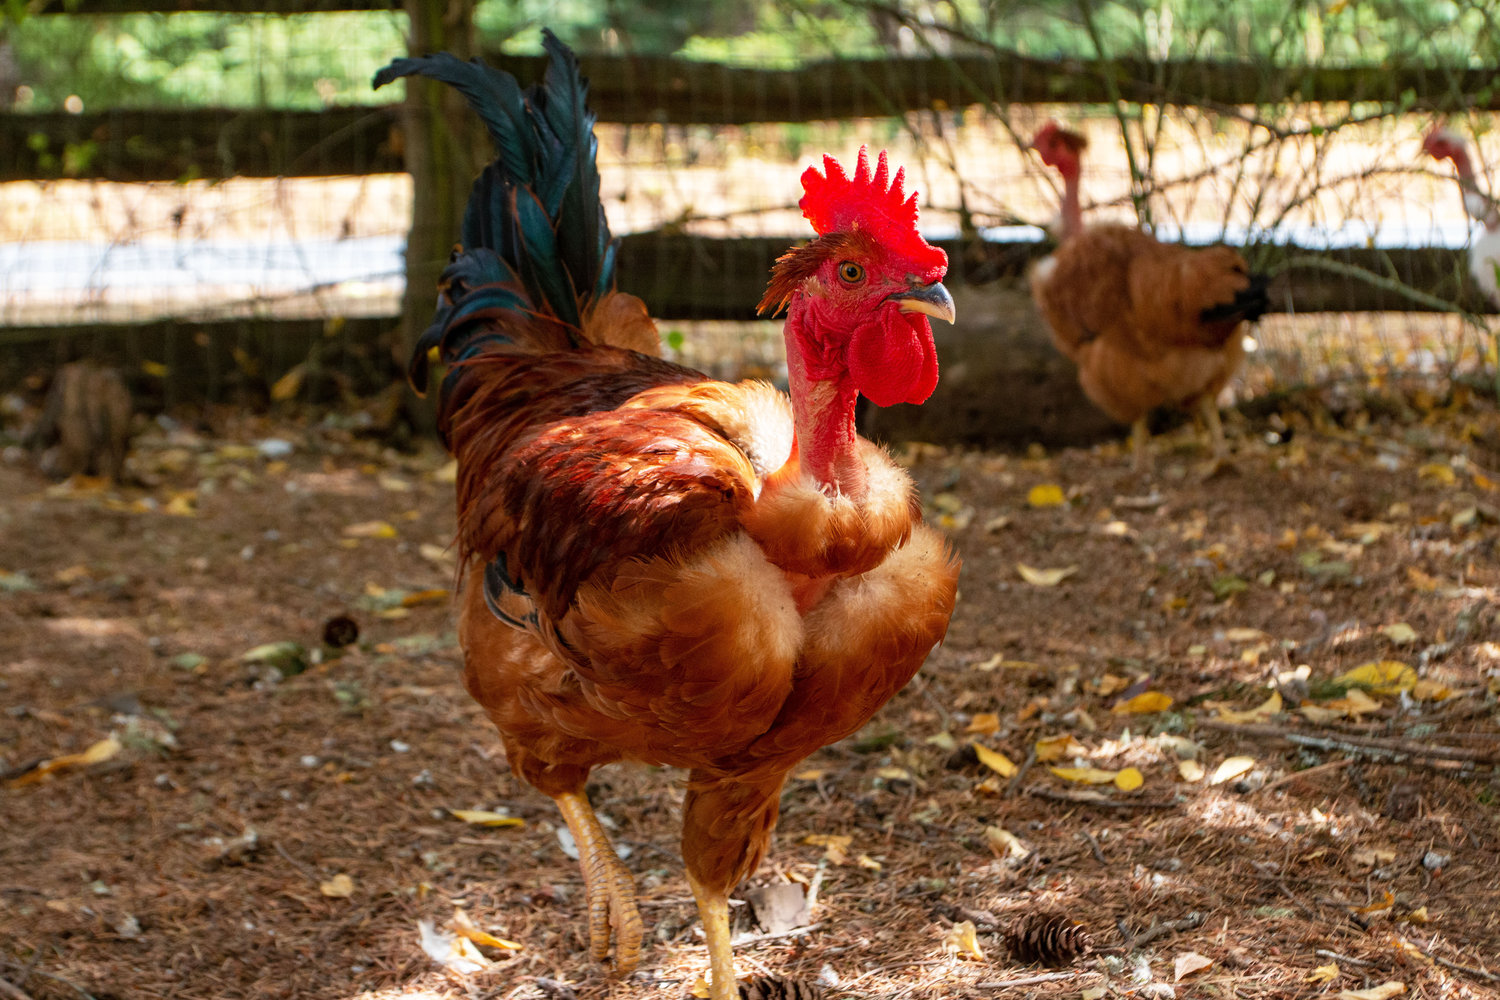 A naked neck rooster, while looking angry, is a friendly breed of poultry.